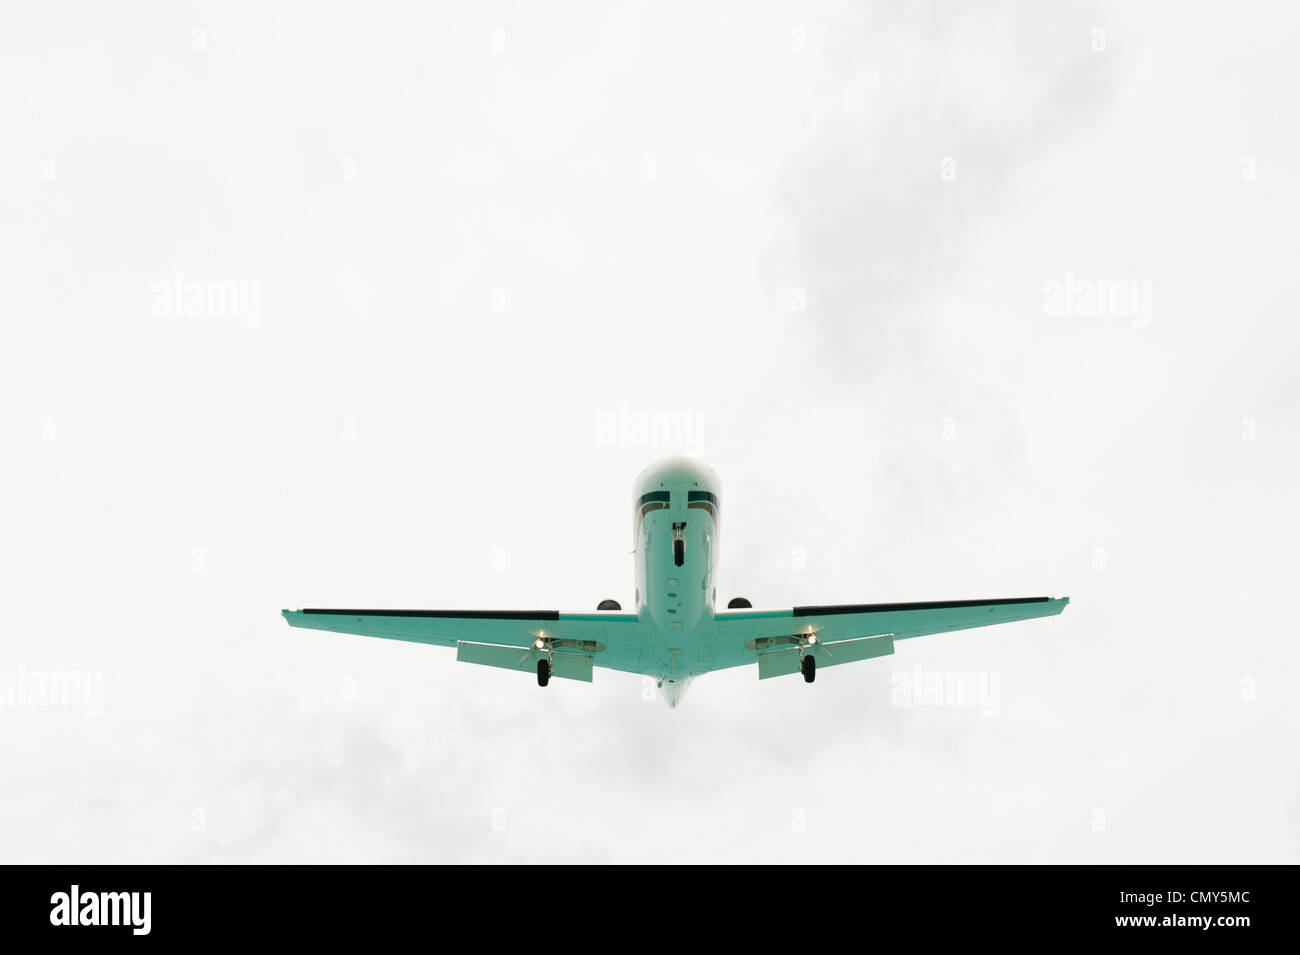 A shot taken on the ground of the bottom of an airplane flying in a cloudy sky. Stock Photo